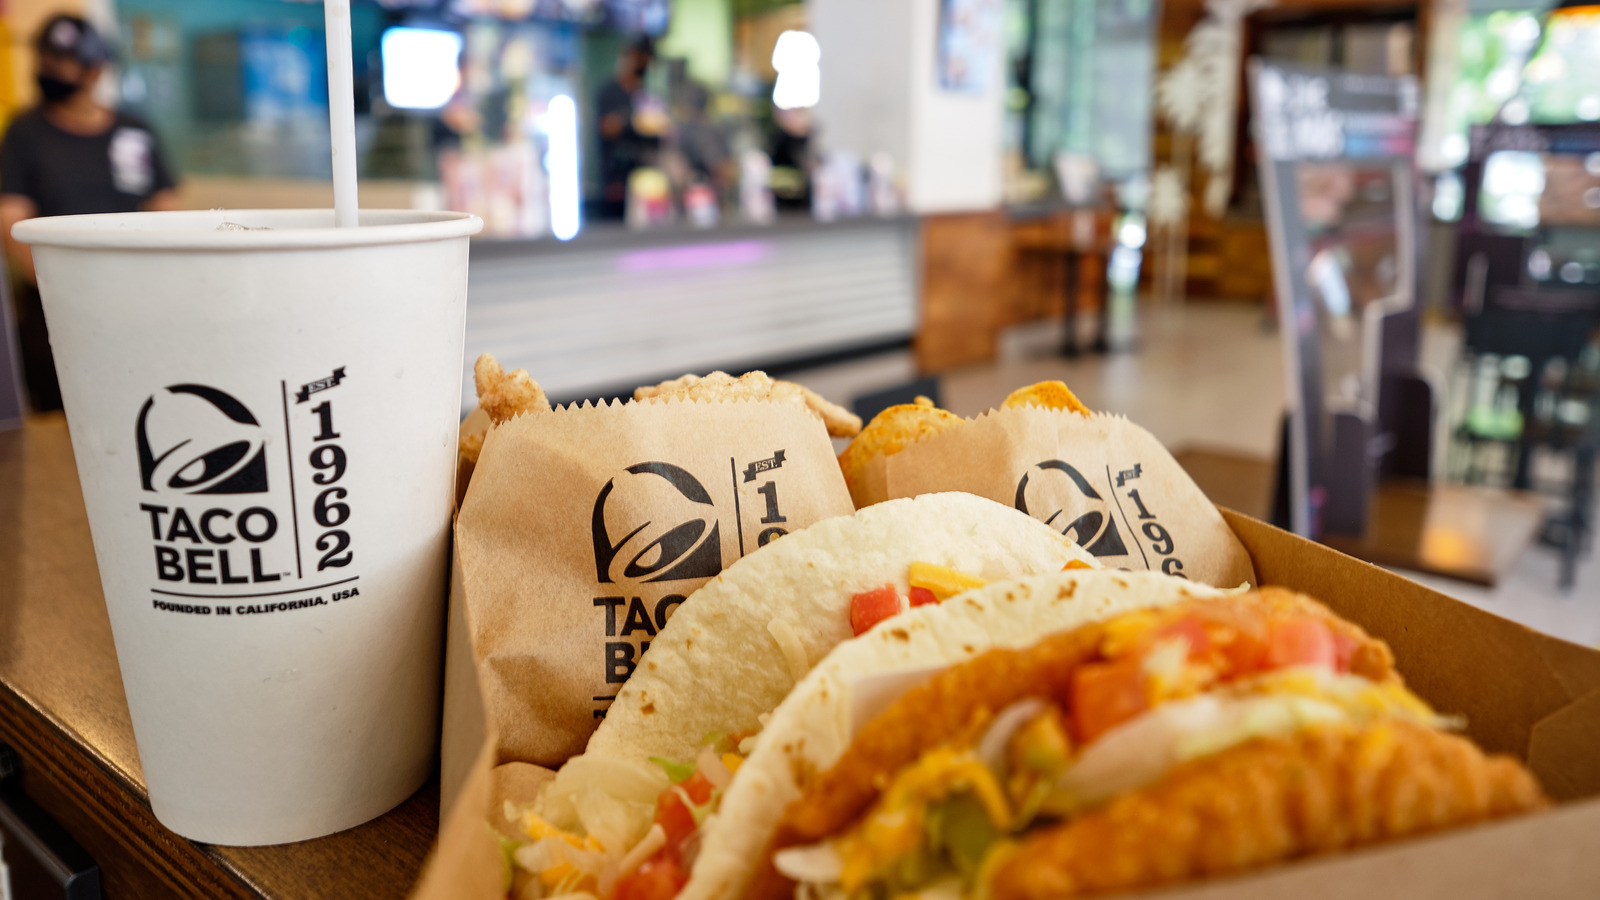 Reddit Is Thrilled About These Potential New Taco Bell Items